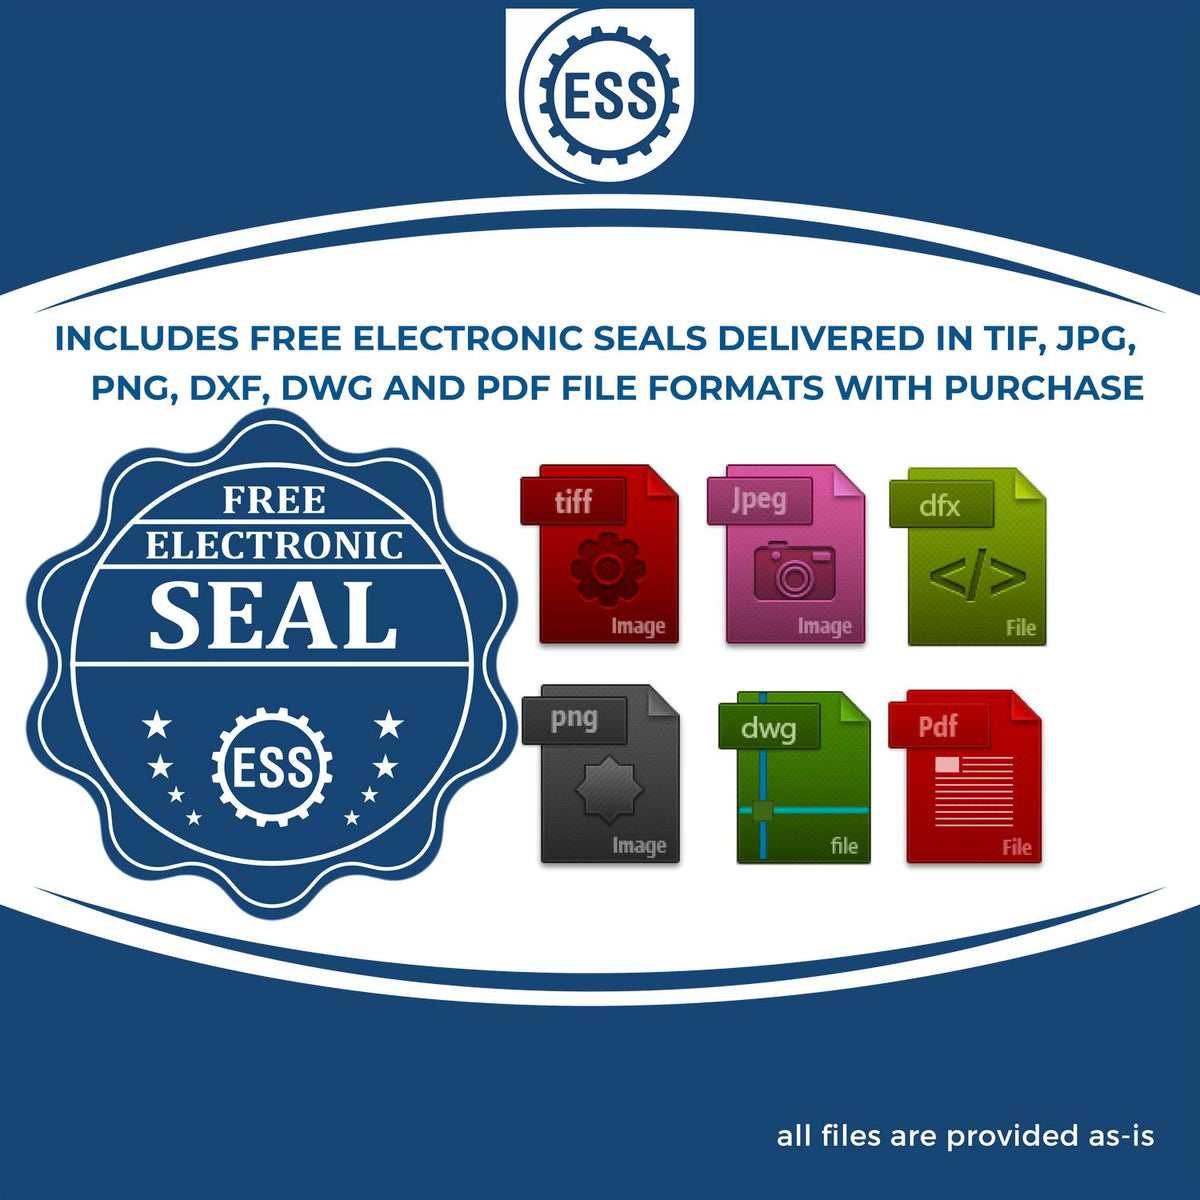 An infographic for the free electronic seal for the Slim Pre-Inked Iowa Professional Geologist Seal Stamp illustrating the different file type icons such as DXF, DWG, TIF, JPG and PNG.